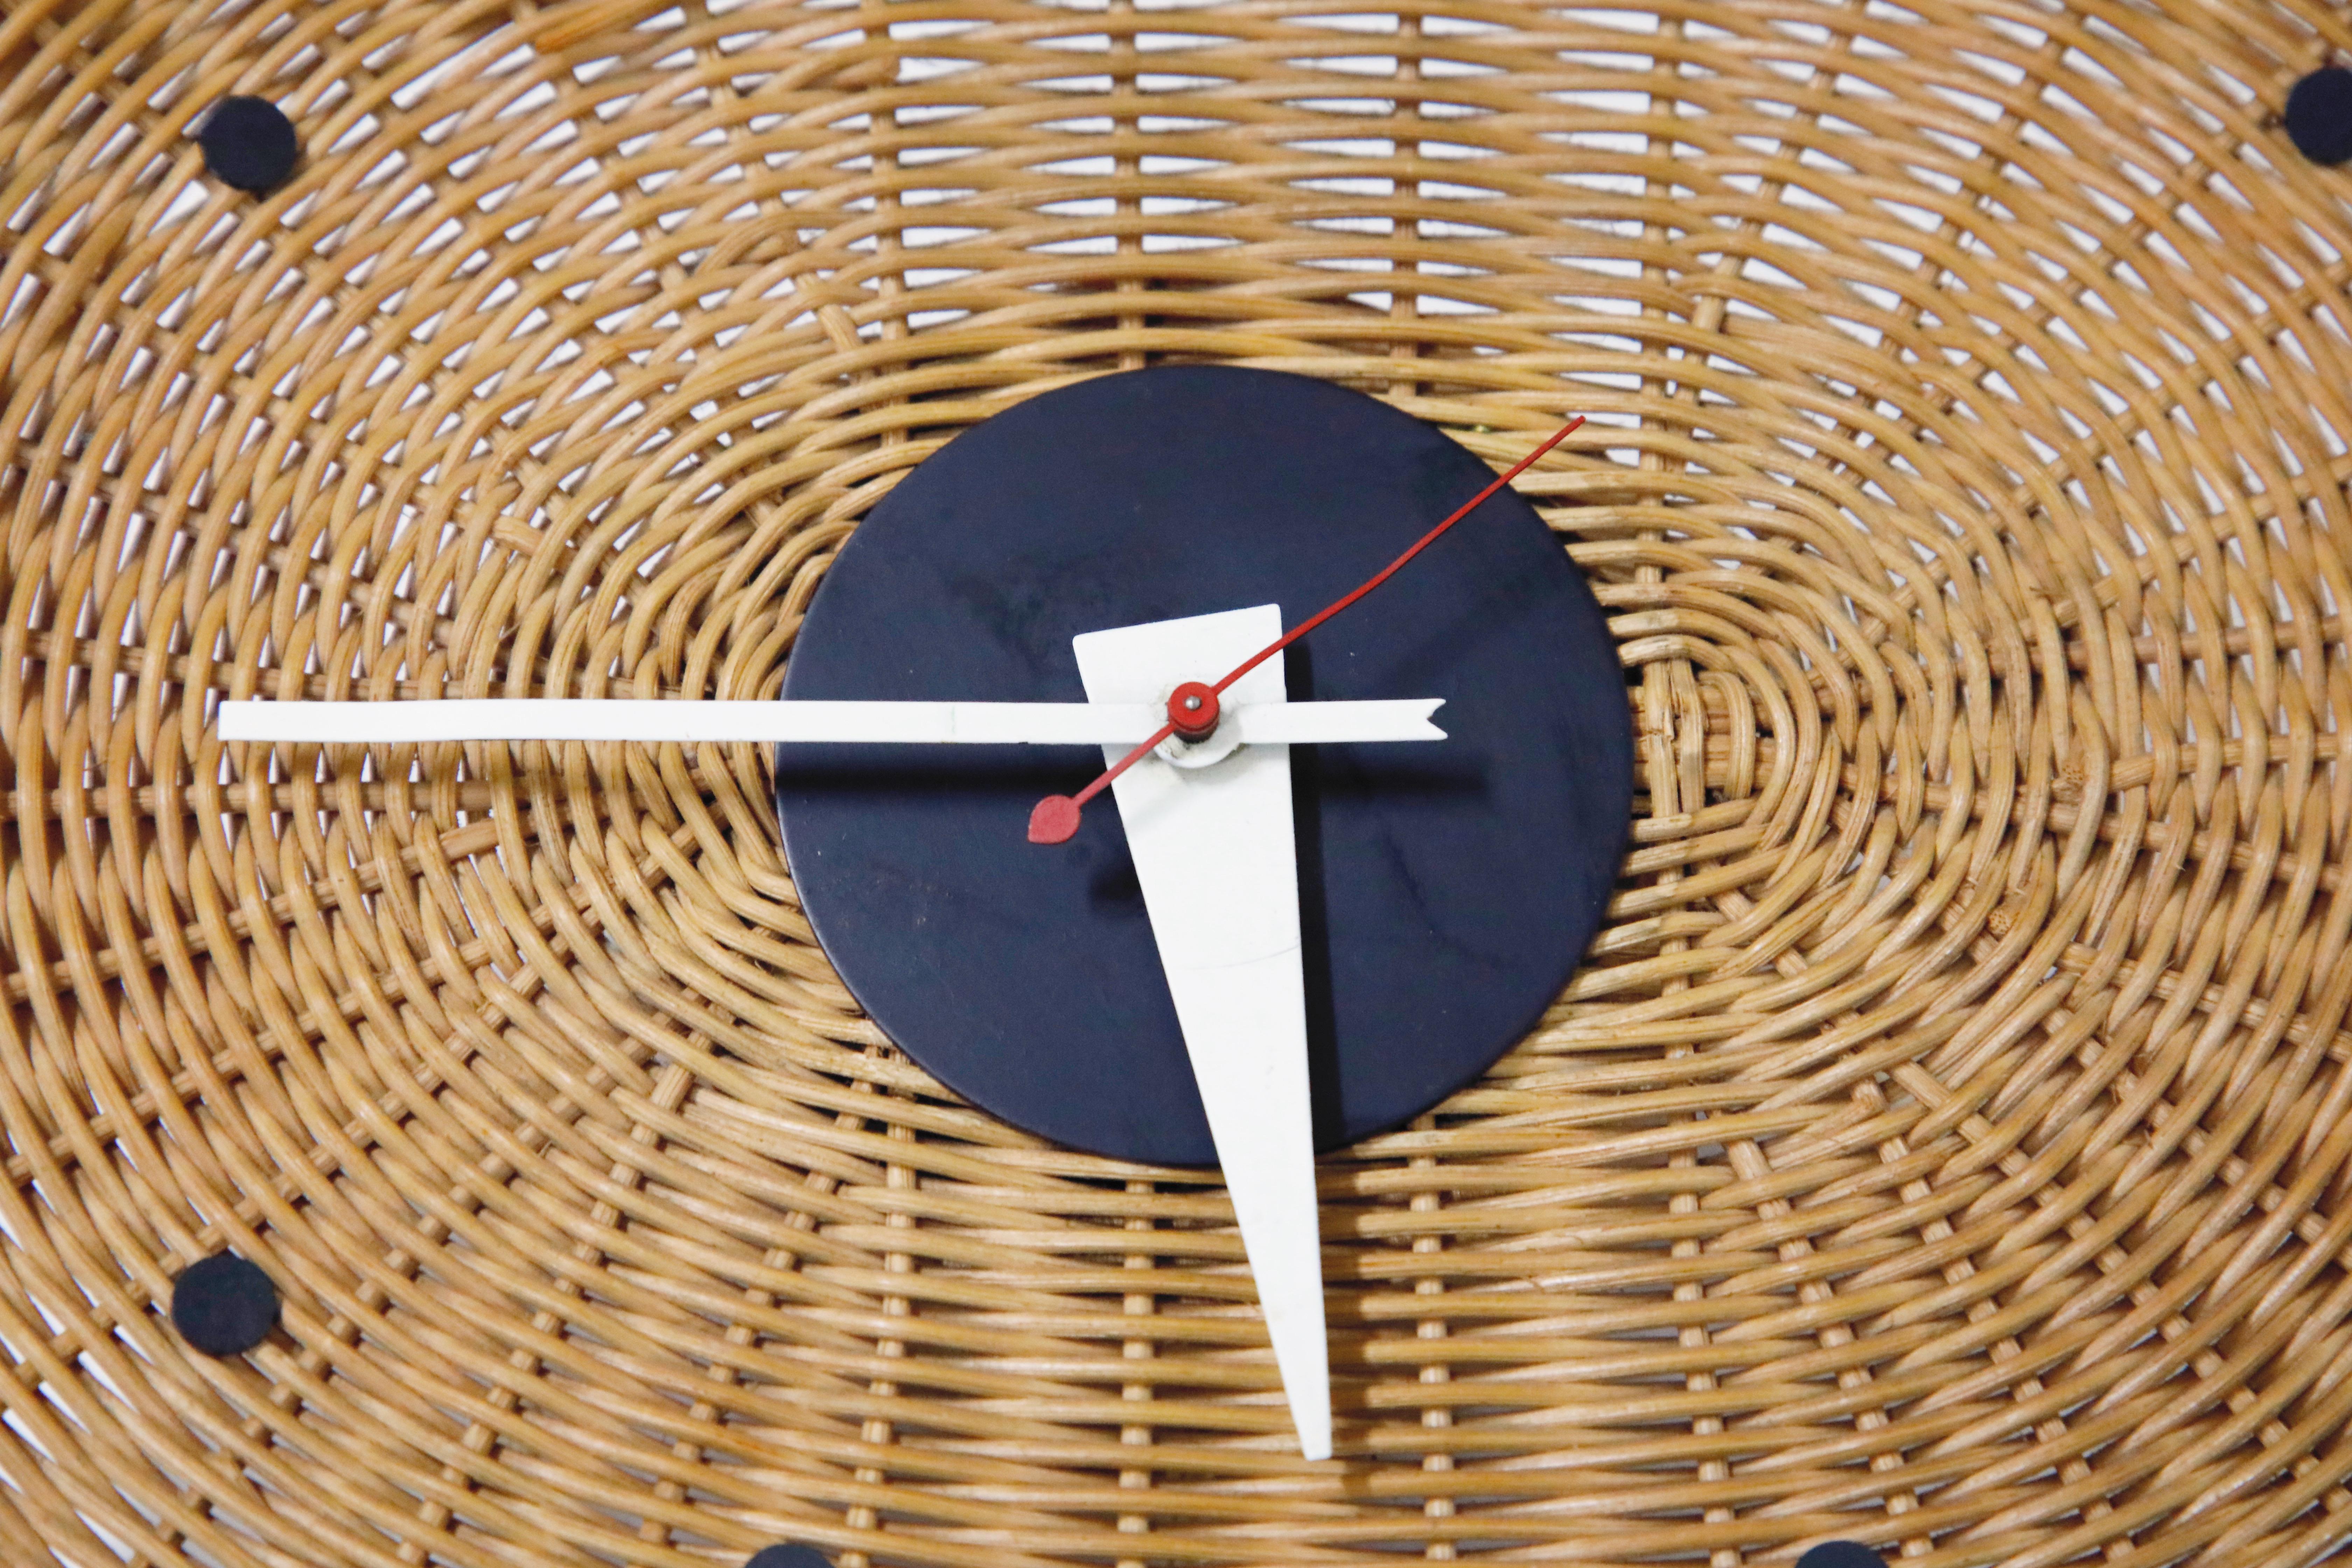 American Original Oval Rattan 'Basket Clock' by George Nelson for Howard Miller, 1950s